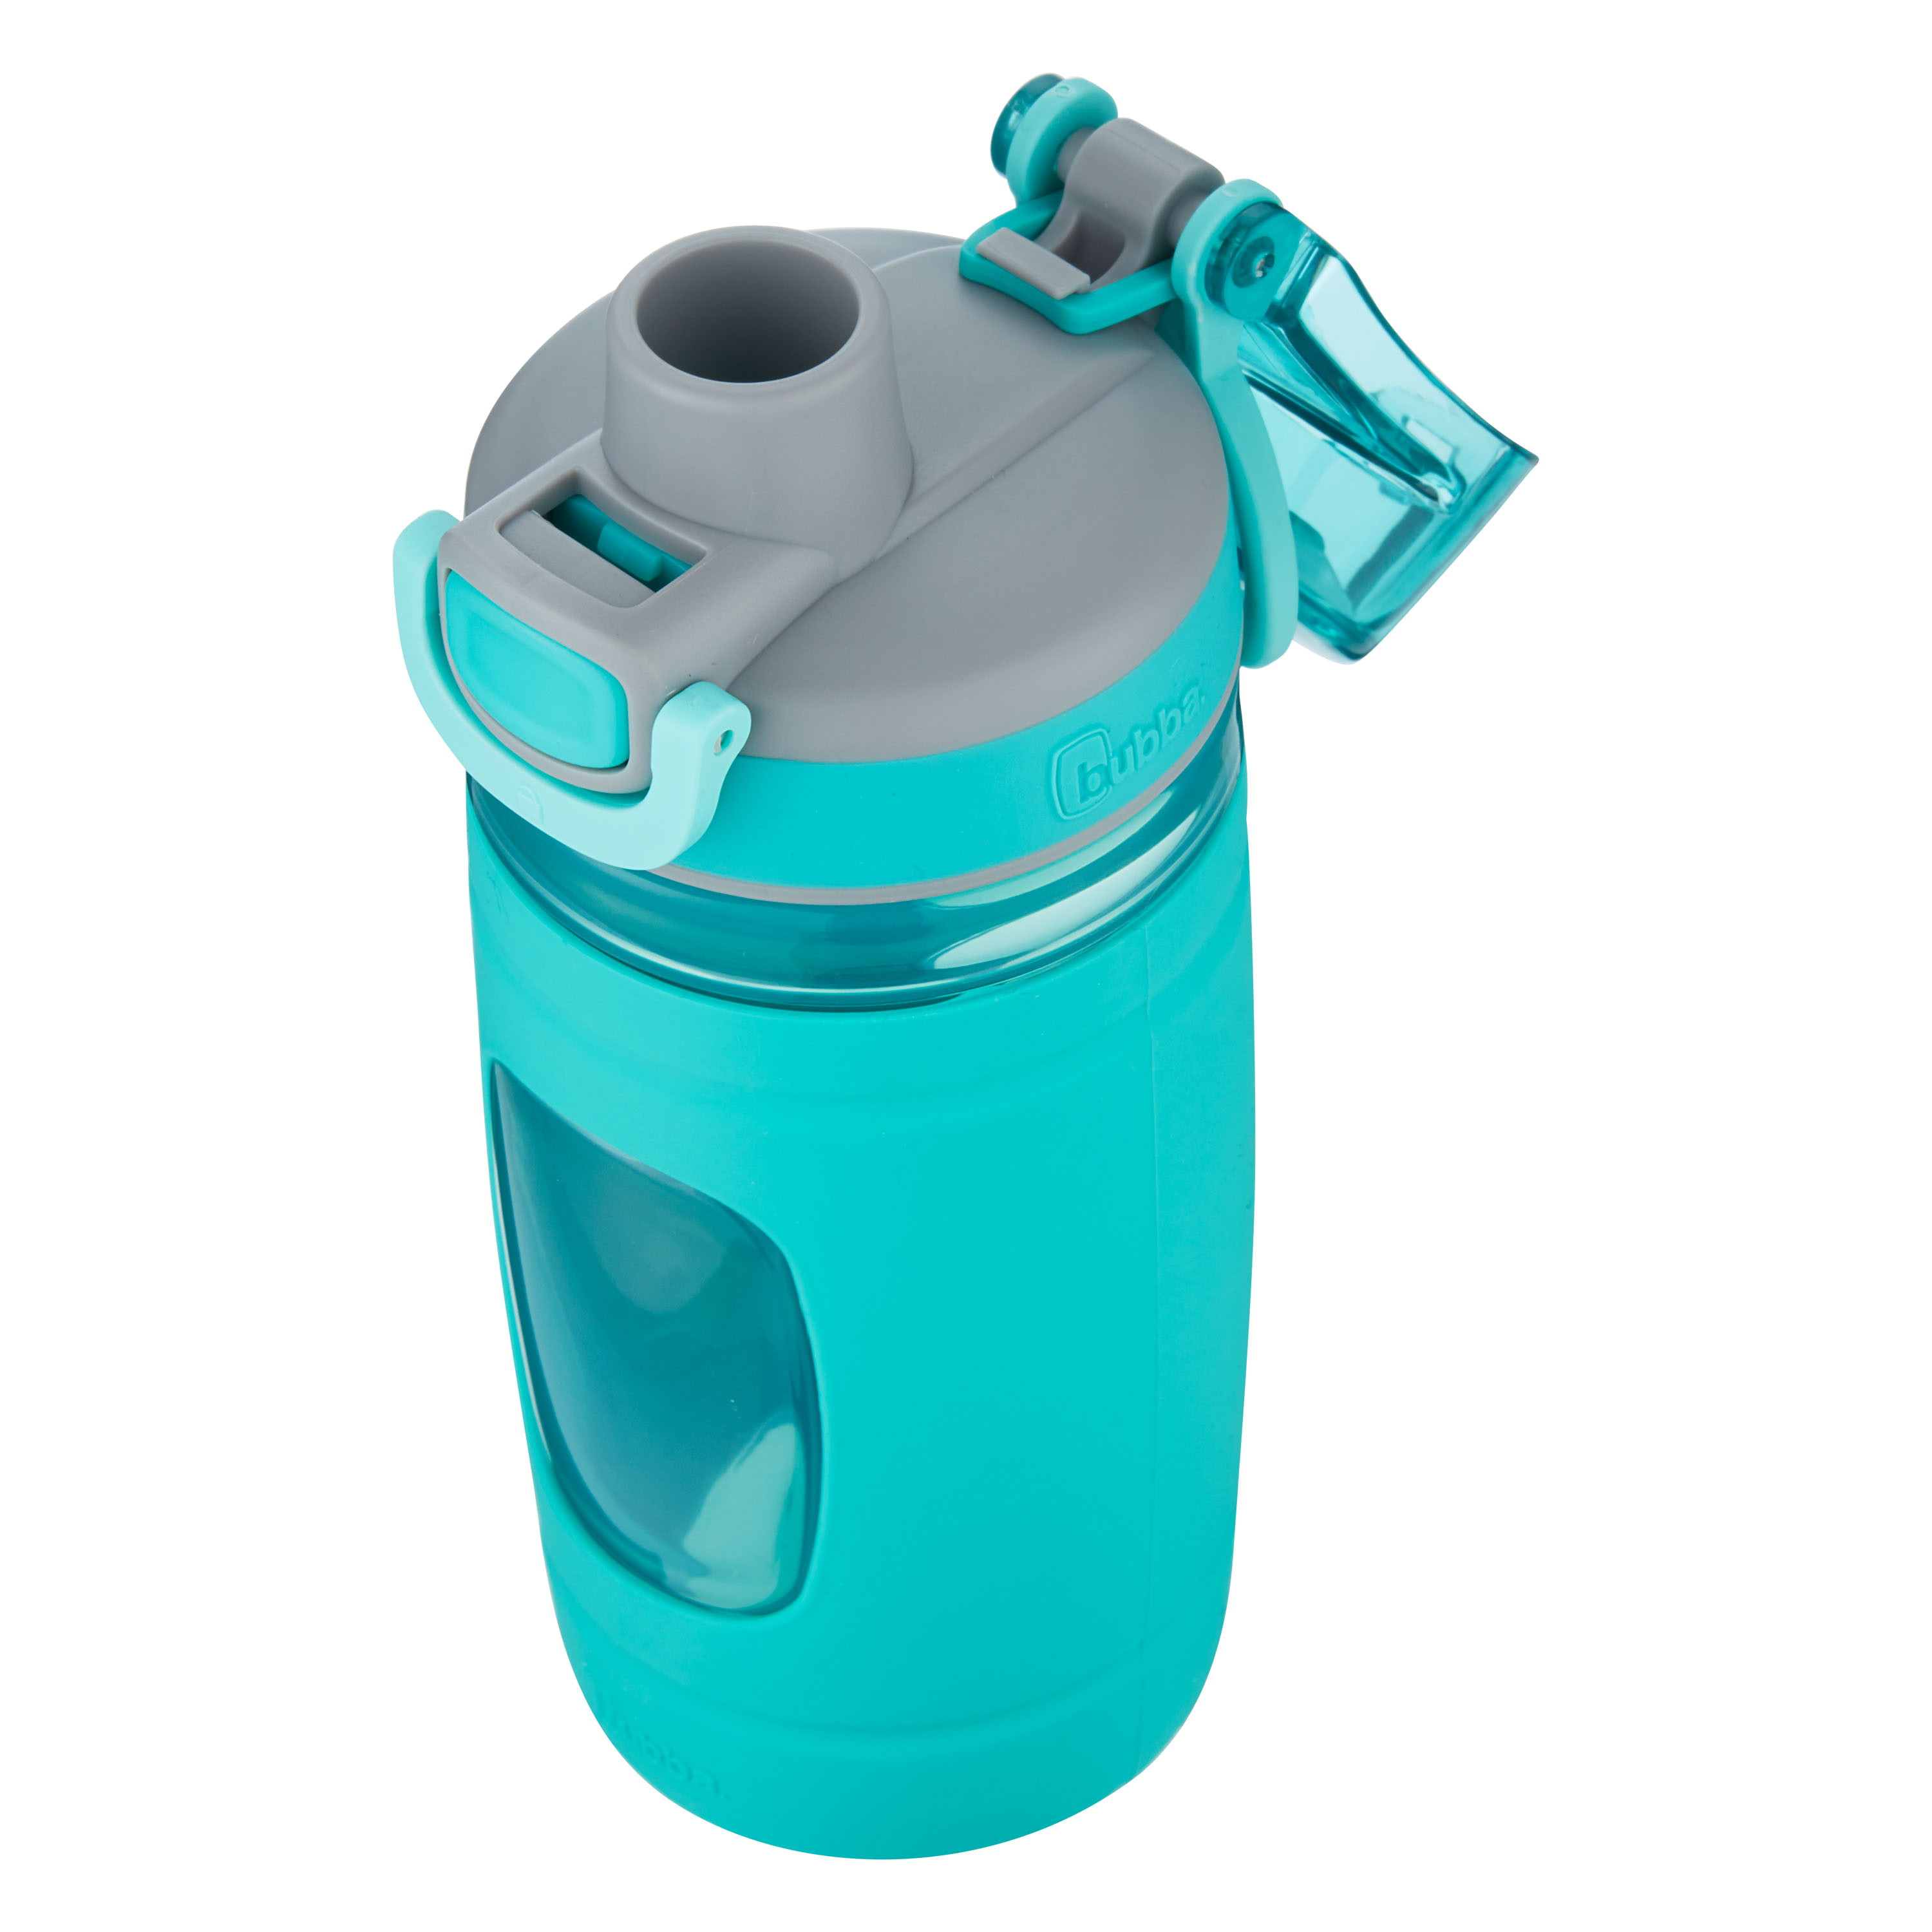 Bubba Flo Kids 16 oz Aqua and Gray Plastic Water Bottle with Wide Mouth Lid - image 3 of 6